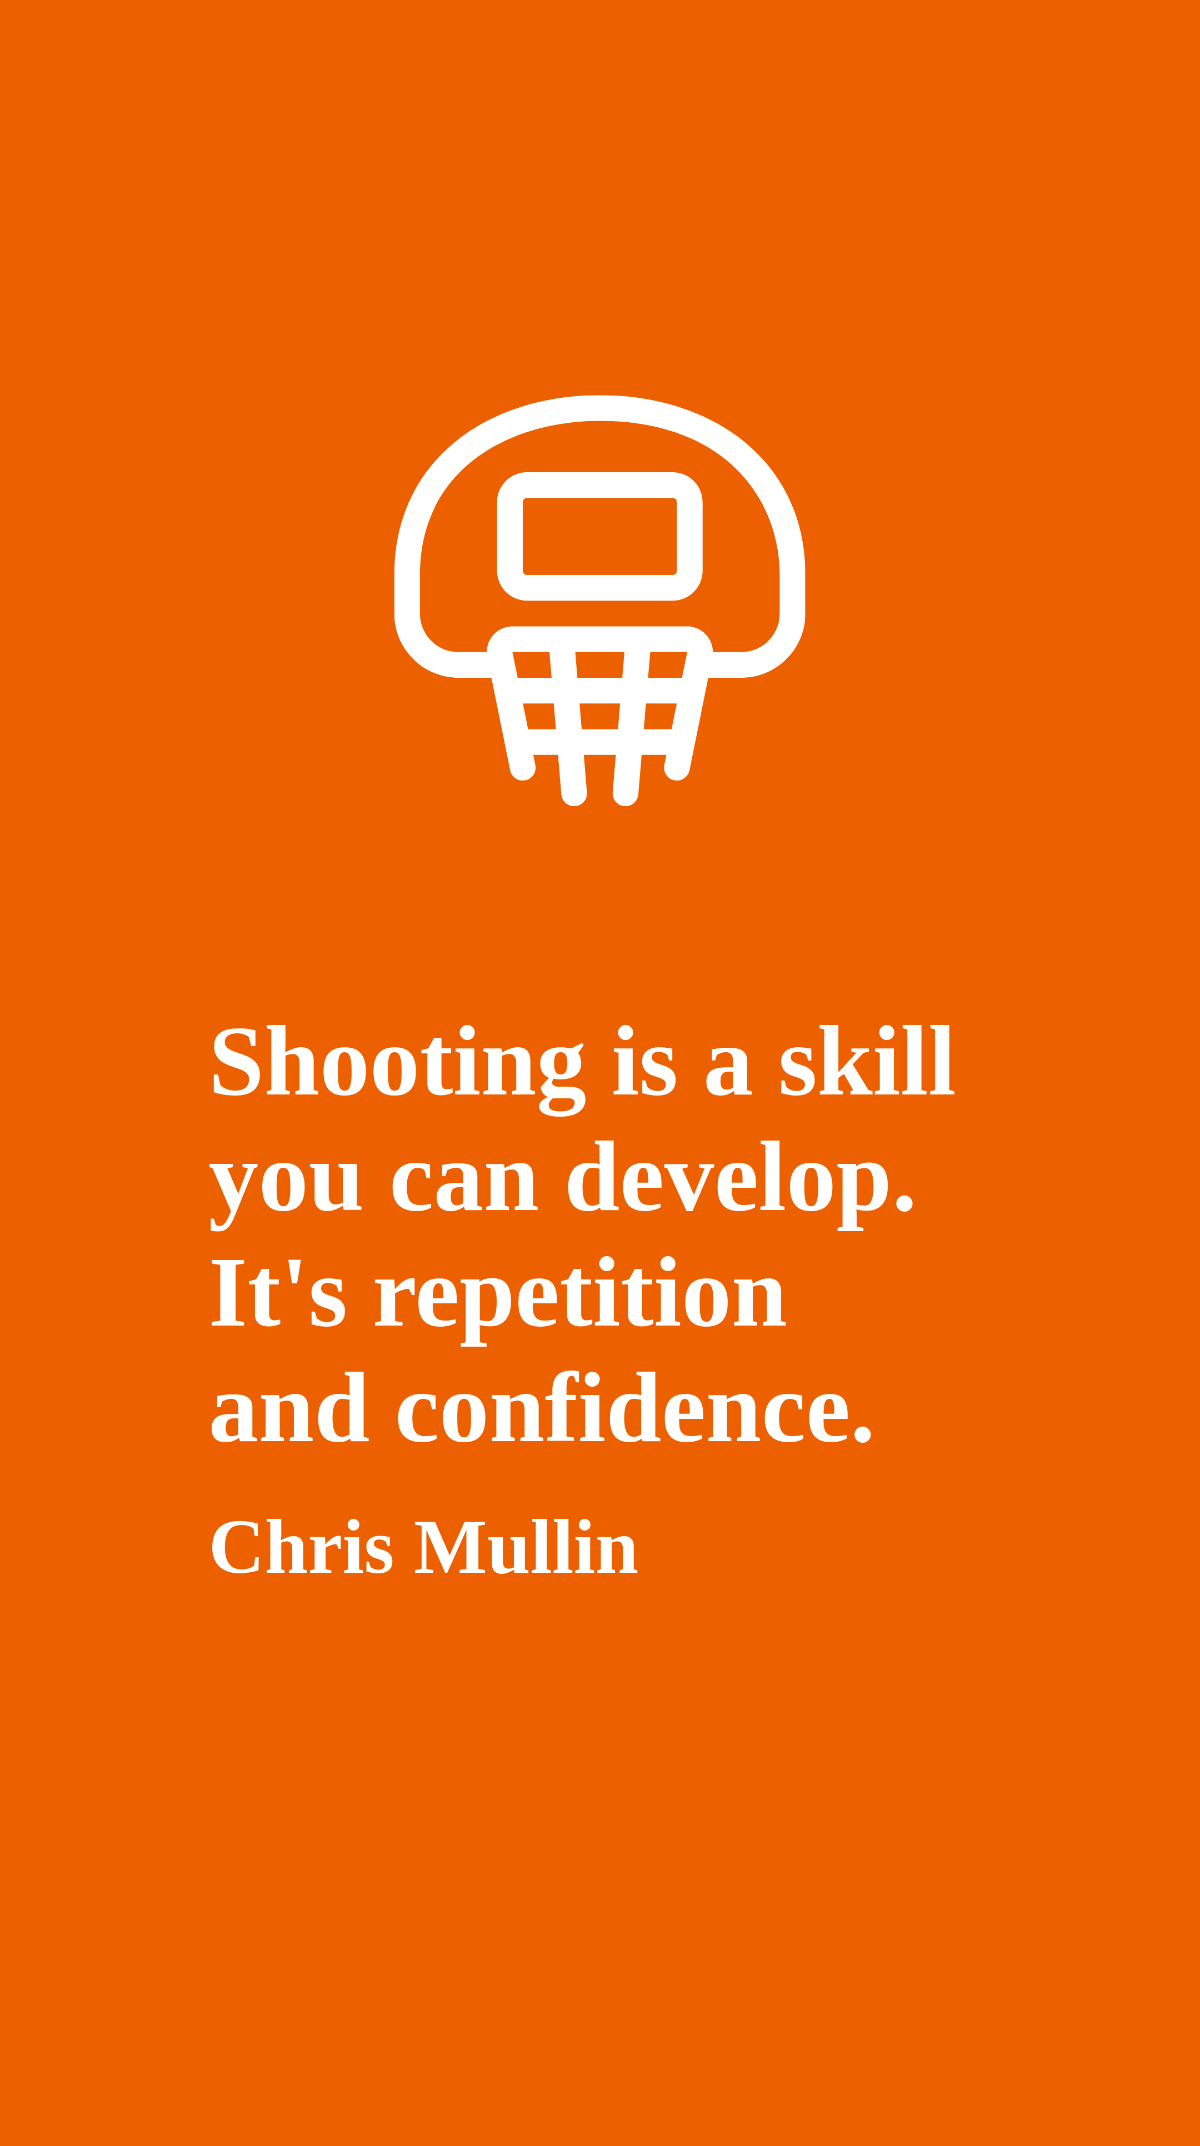 Chris Mullin - Shooting is a skill you can develop. It's repetition and confidence. Template